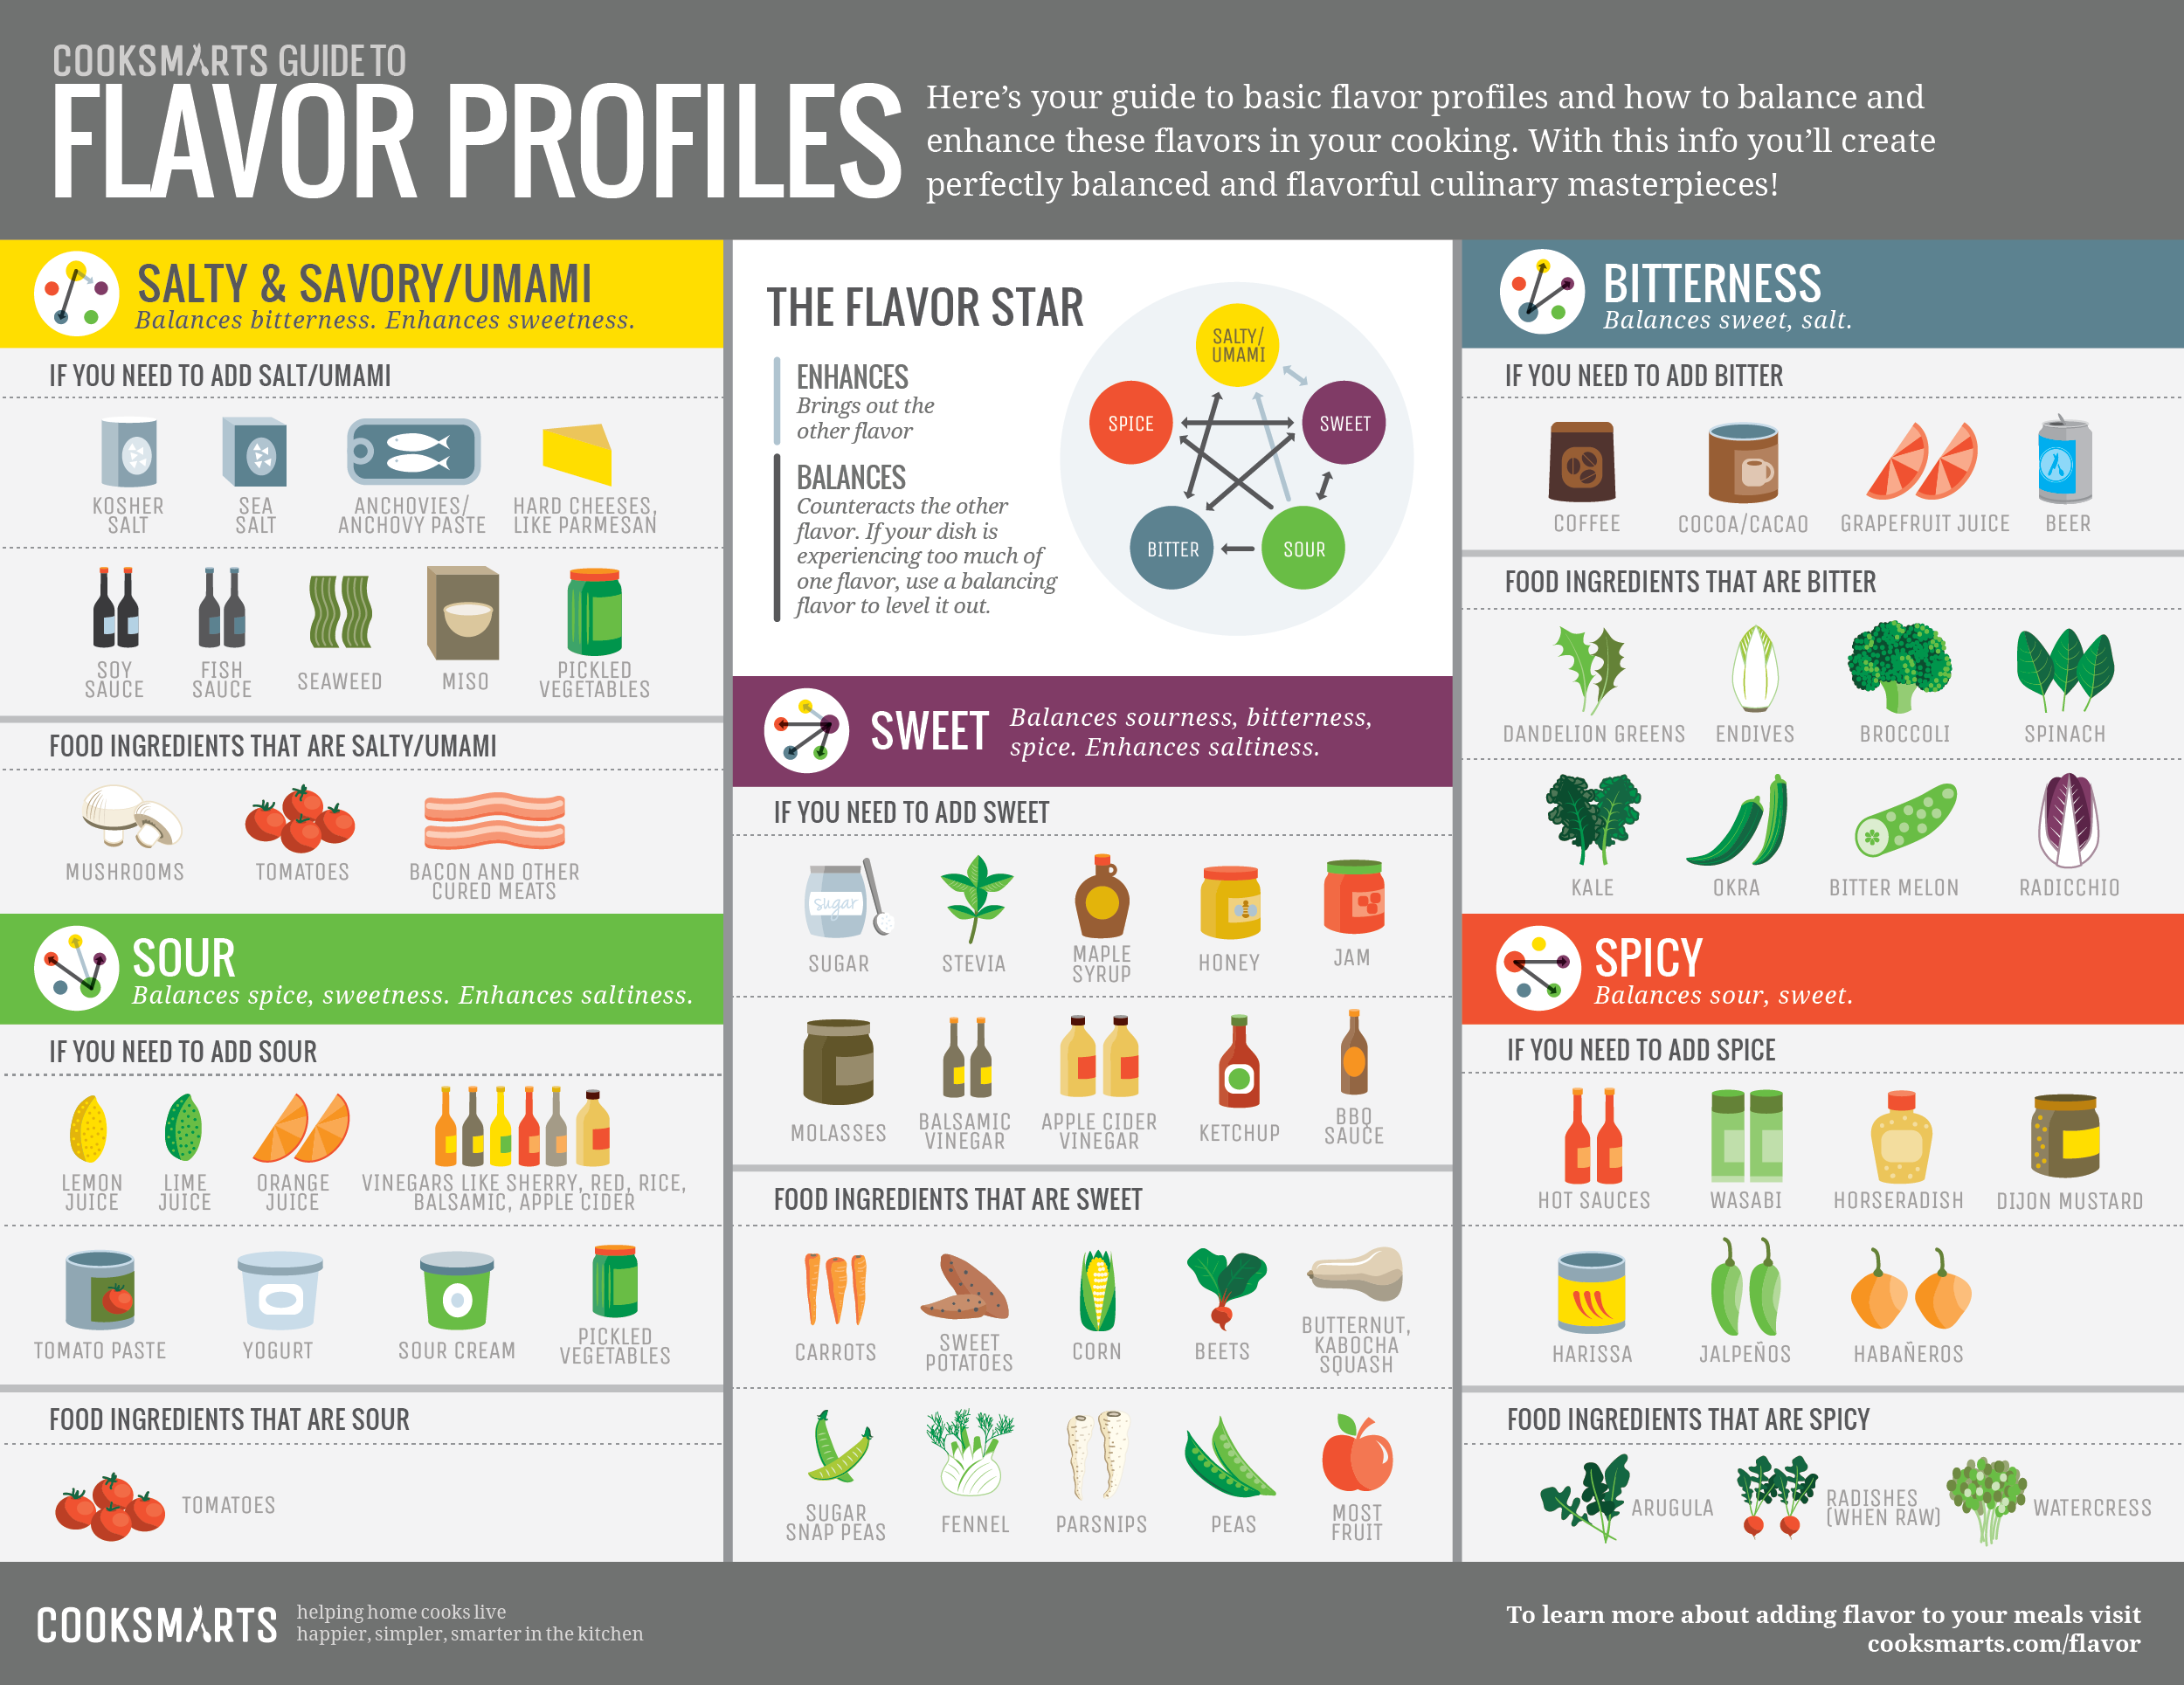 Balance and enhance flavors with @cooksmarts guide to flavor profiles #infographic